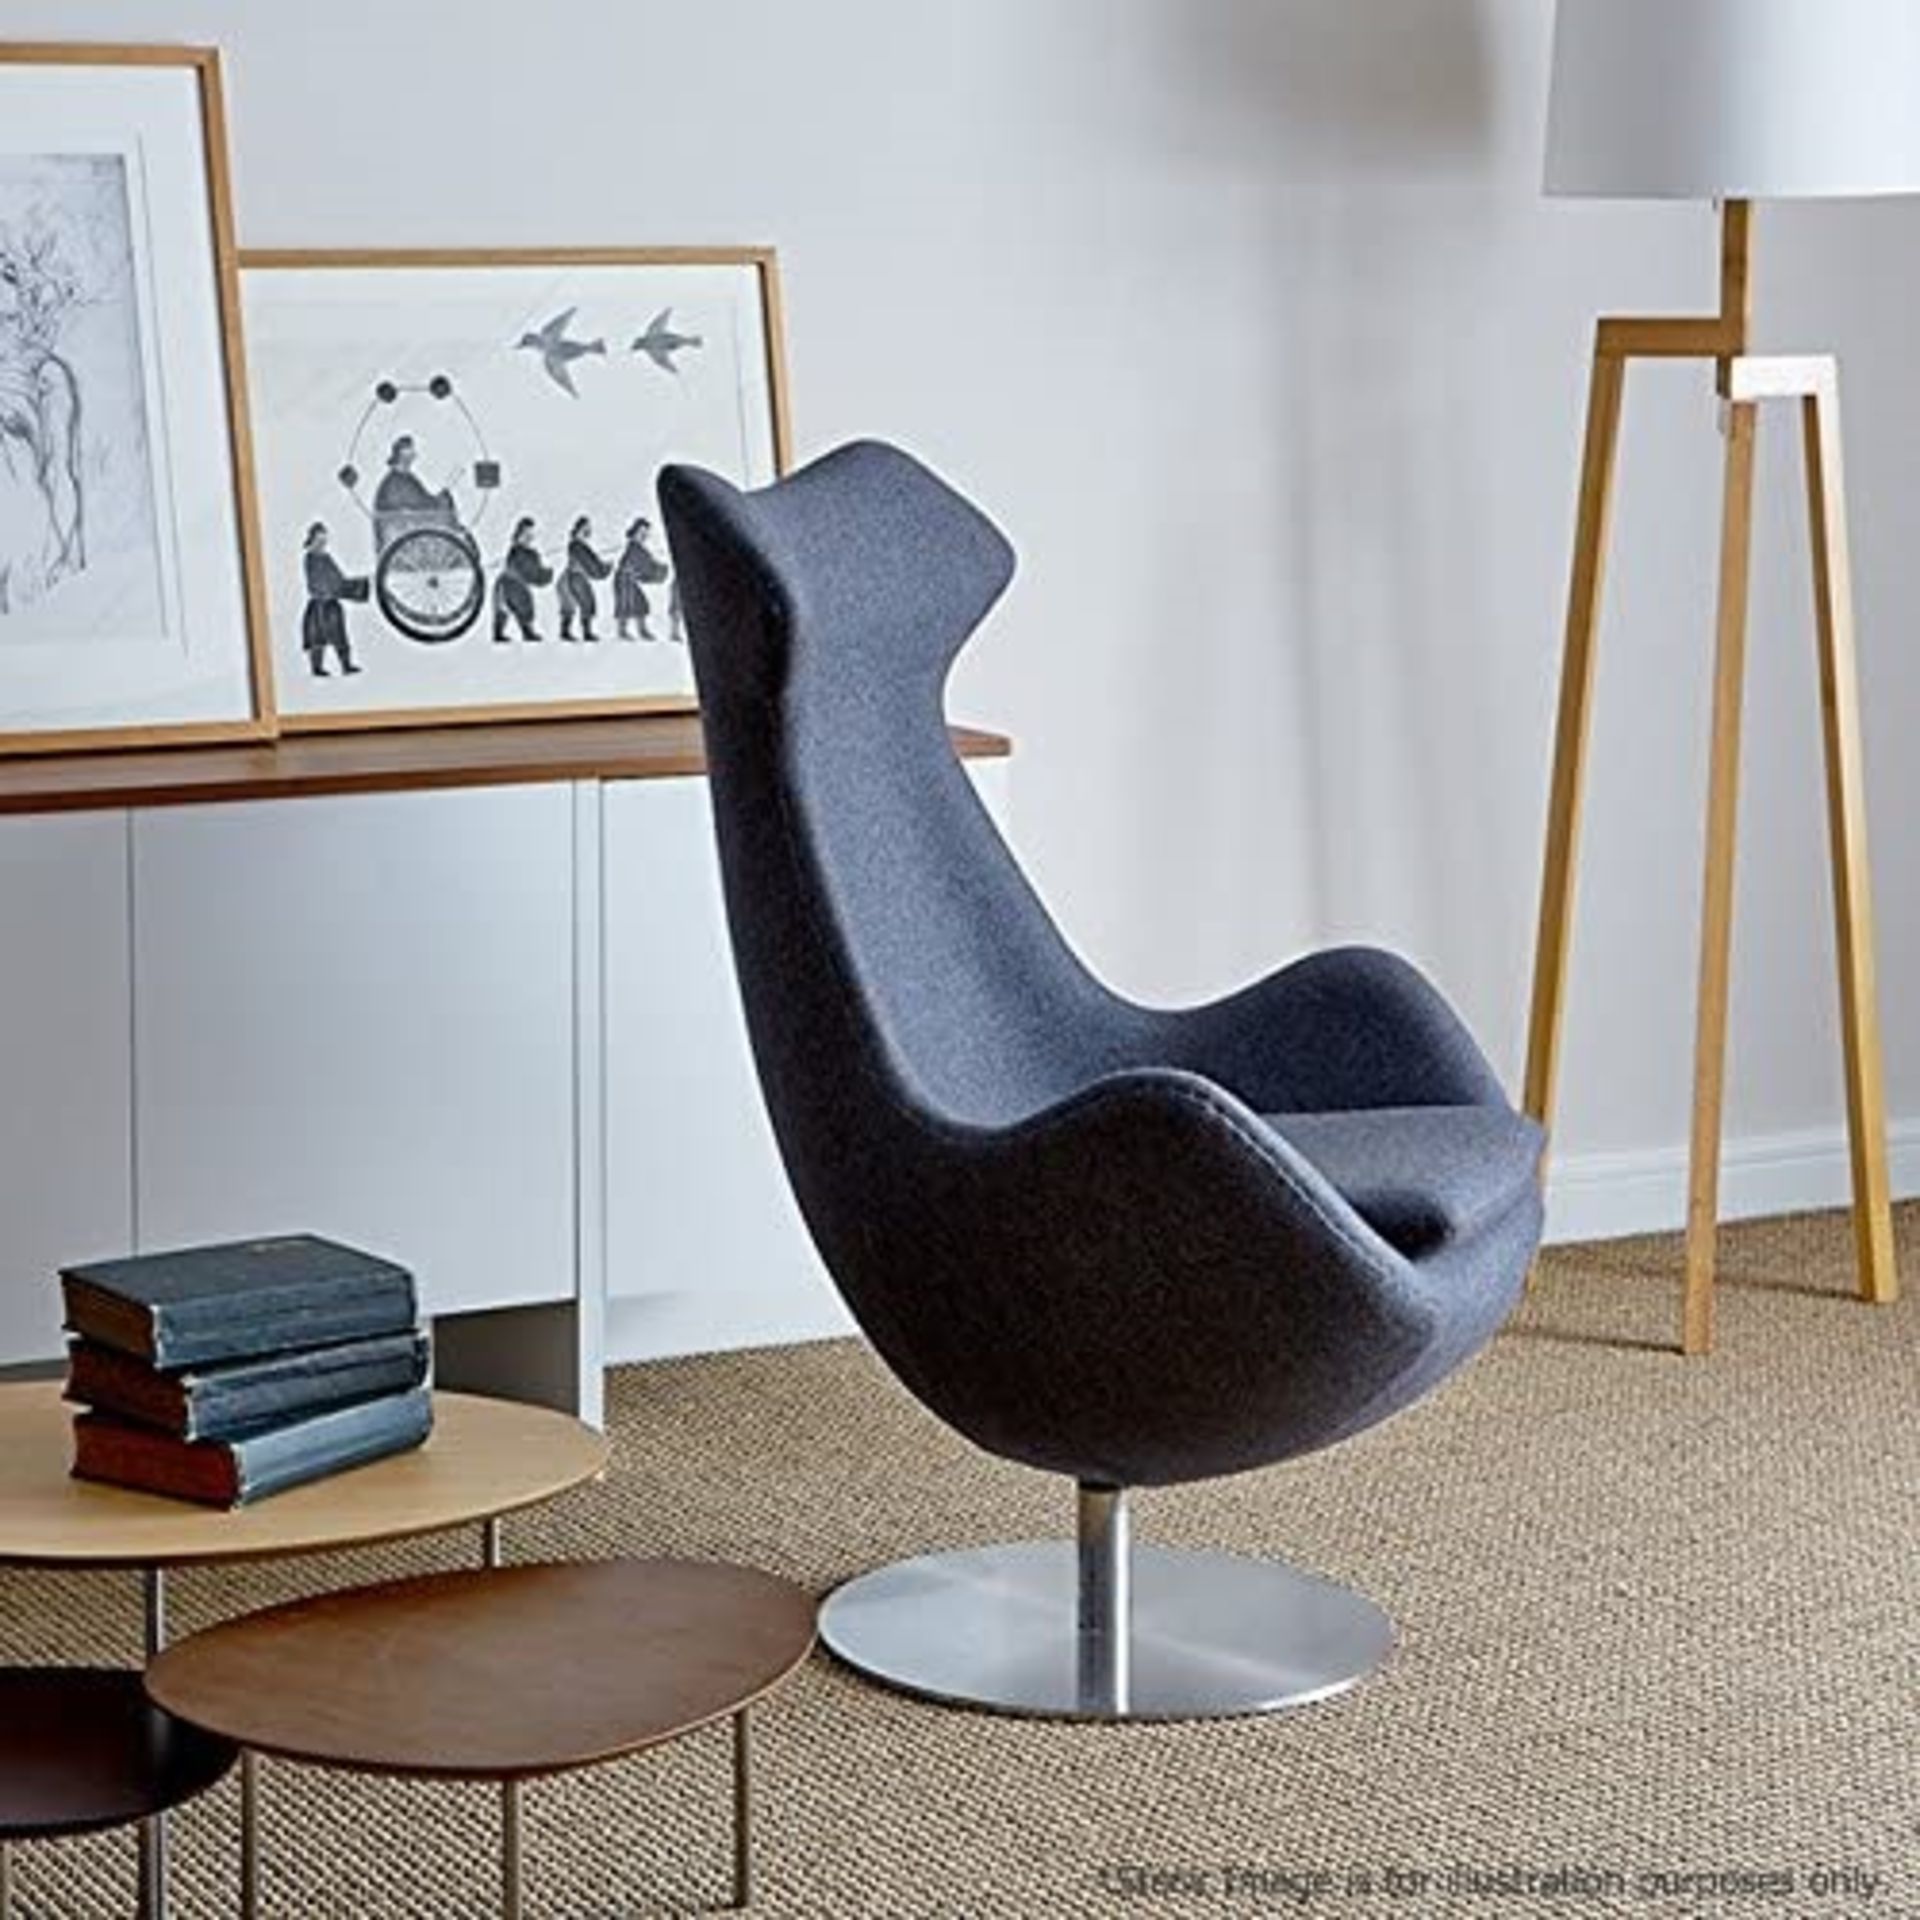 1 x Arne Jacobsen-Inspired Egg Lounge Chair - Upholstered In Grey Cashmere With Steel Base - Image 7 of 13